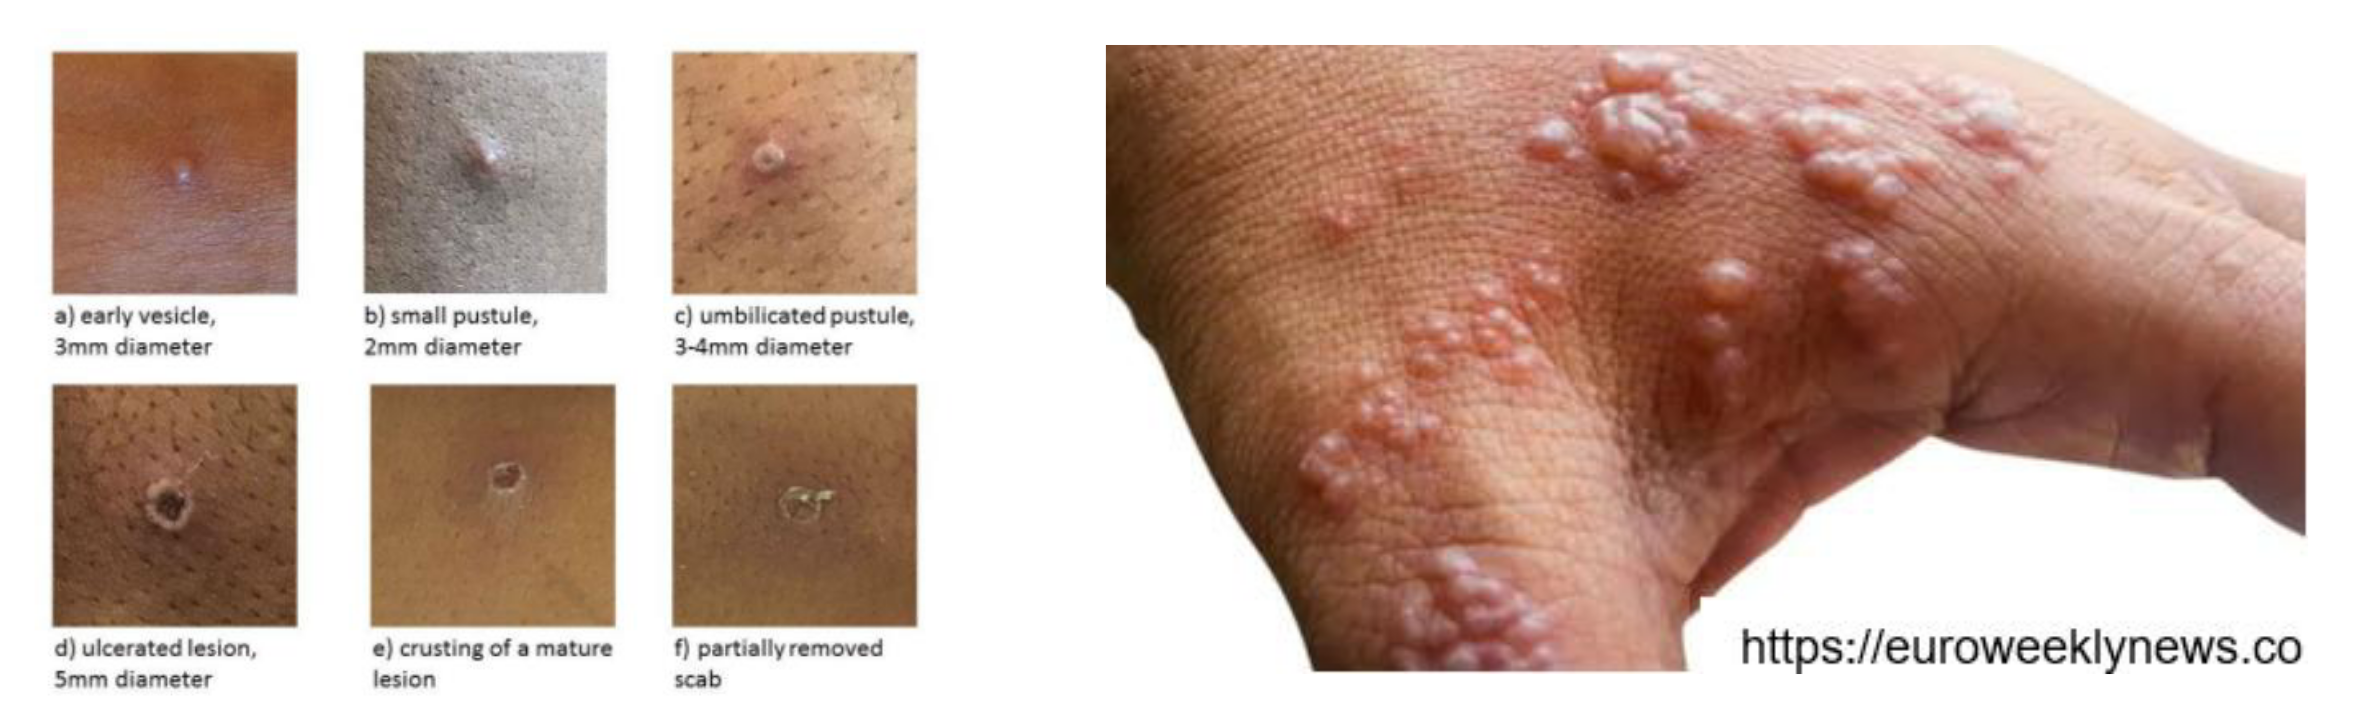 Monkeypox lesion appearance reference